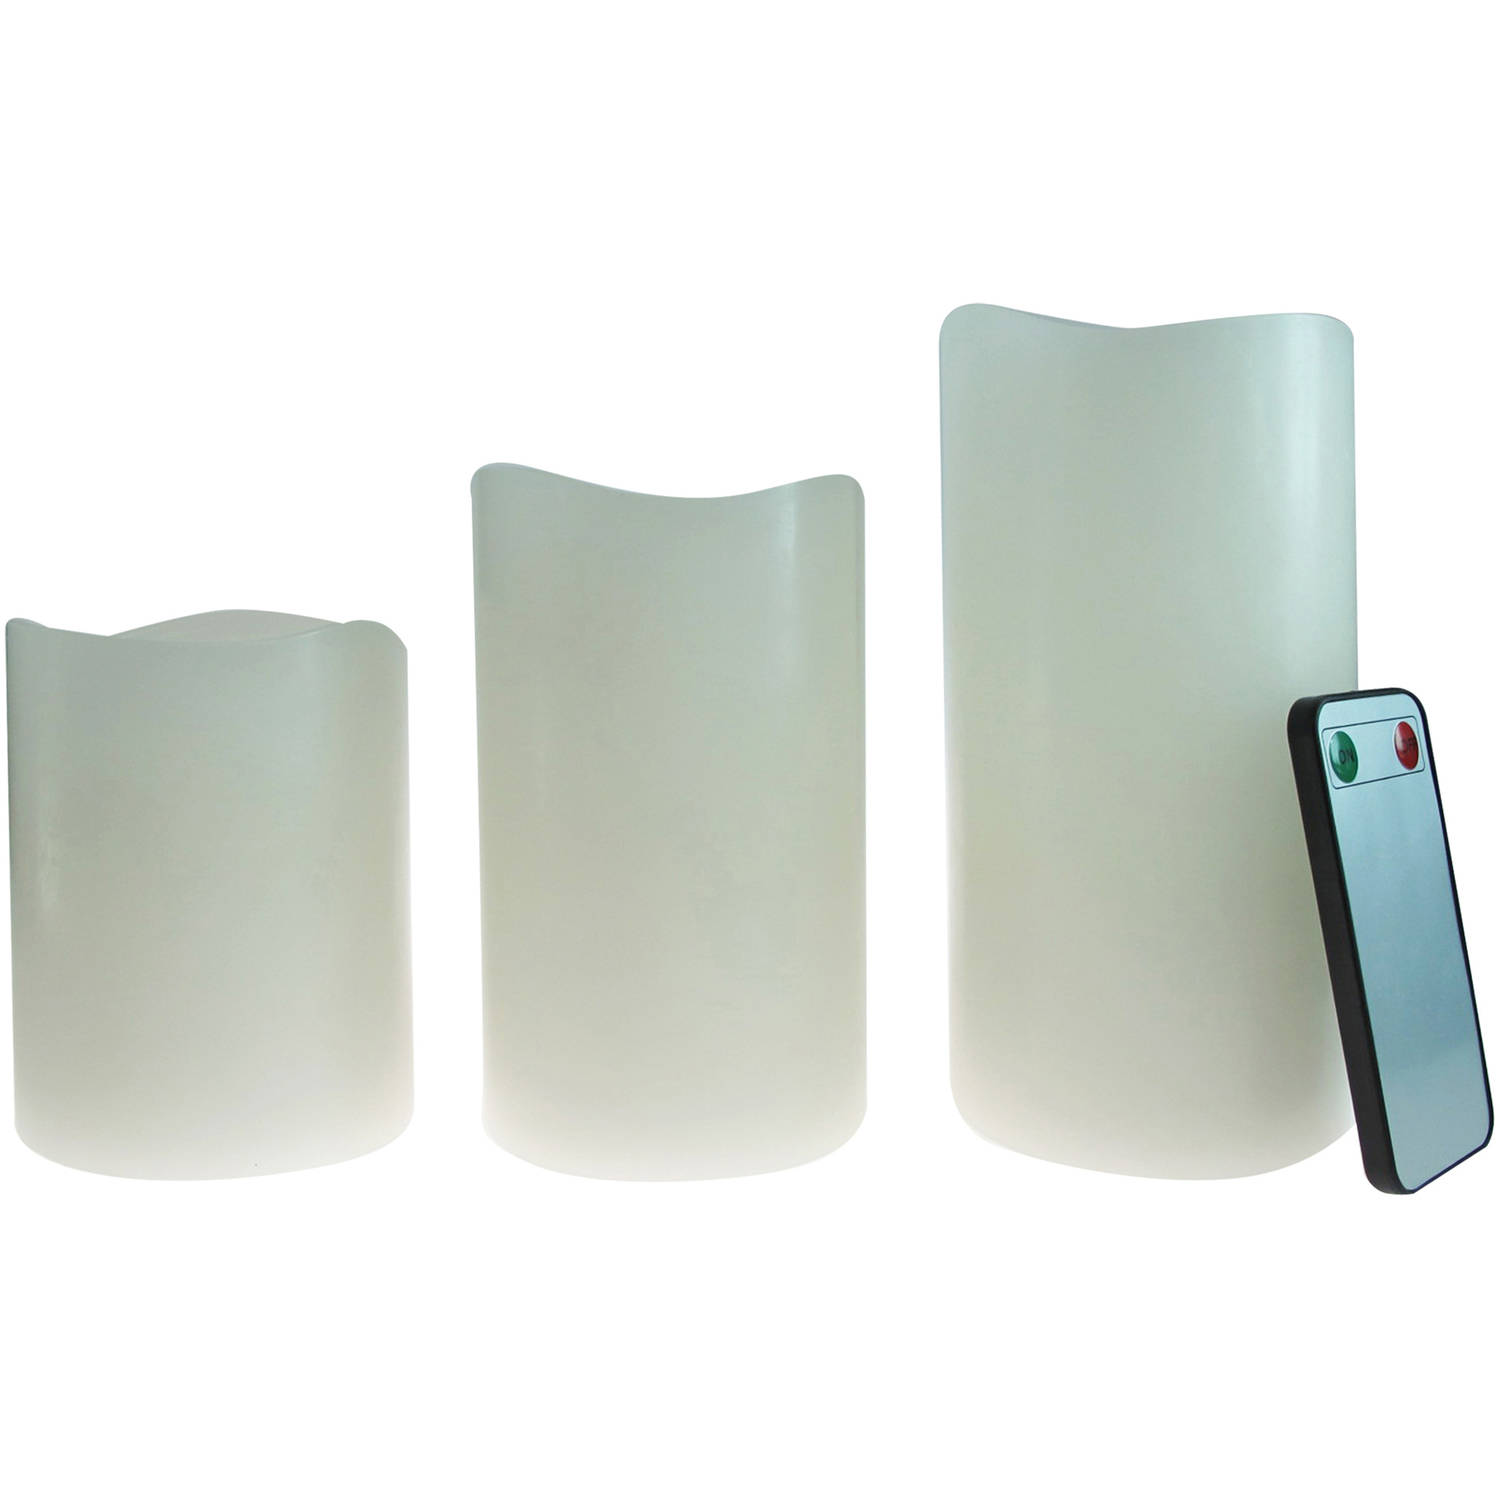 Better Homes & Gardens Flameless LED Pillar Candles 3-Pack Vanilla Scented - image 4 of 9